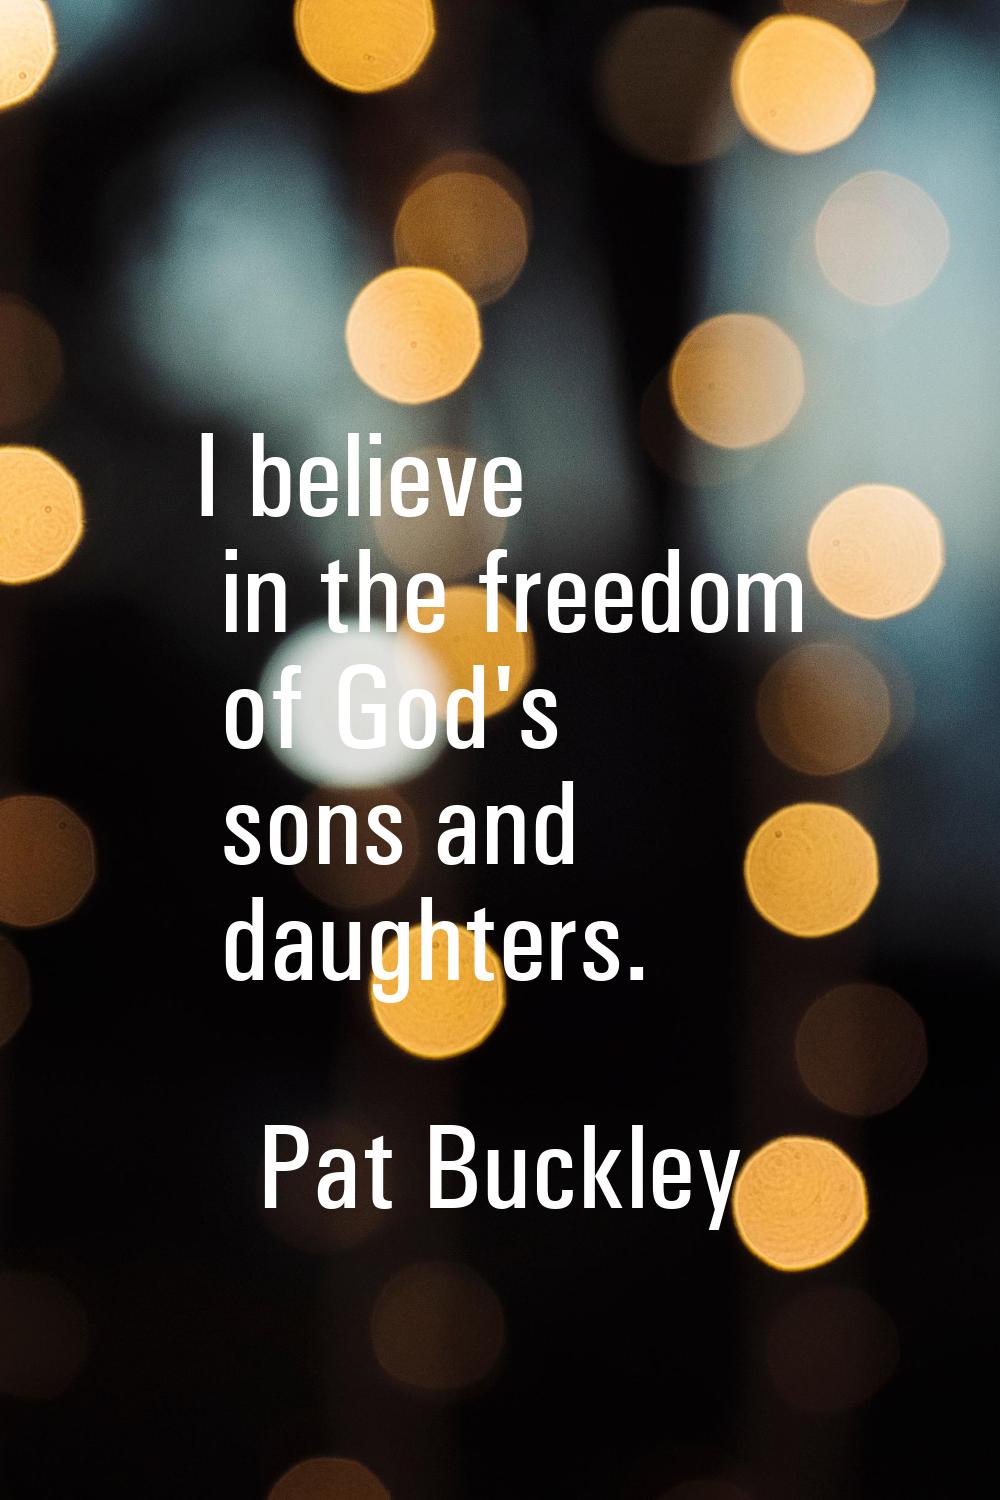 I believe in the freedom of God's sons and daughters.